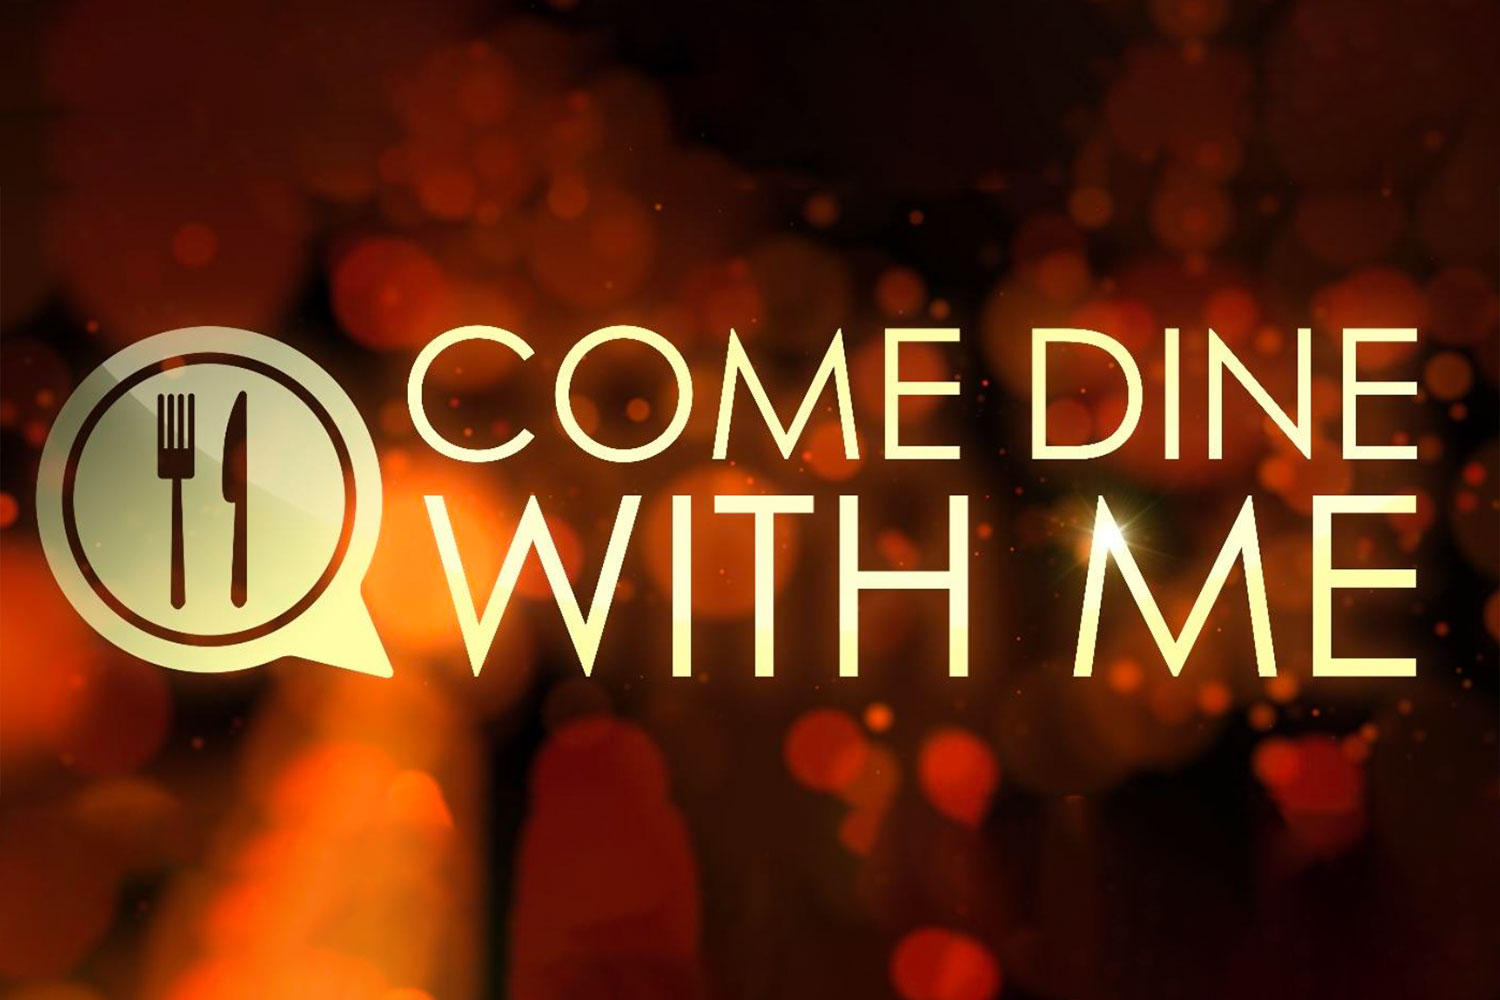 Artwork for Come Dine With Me, supplied by the production